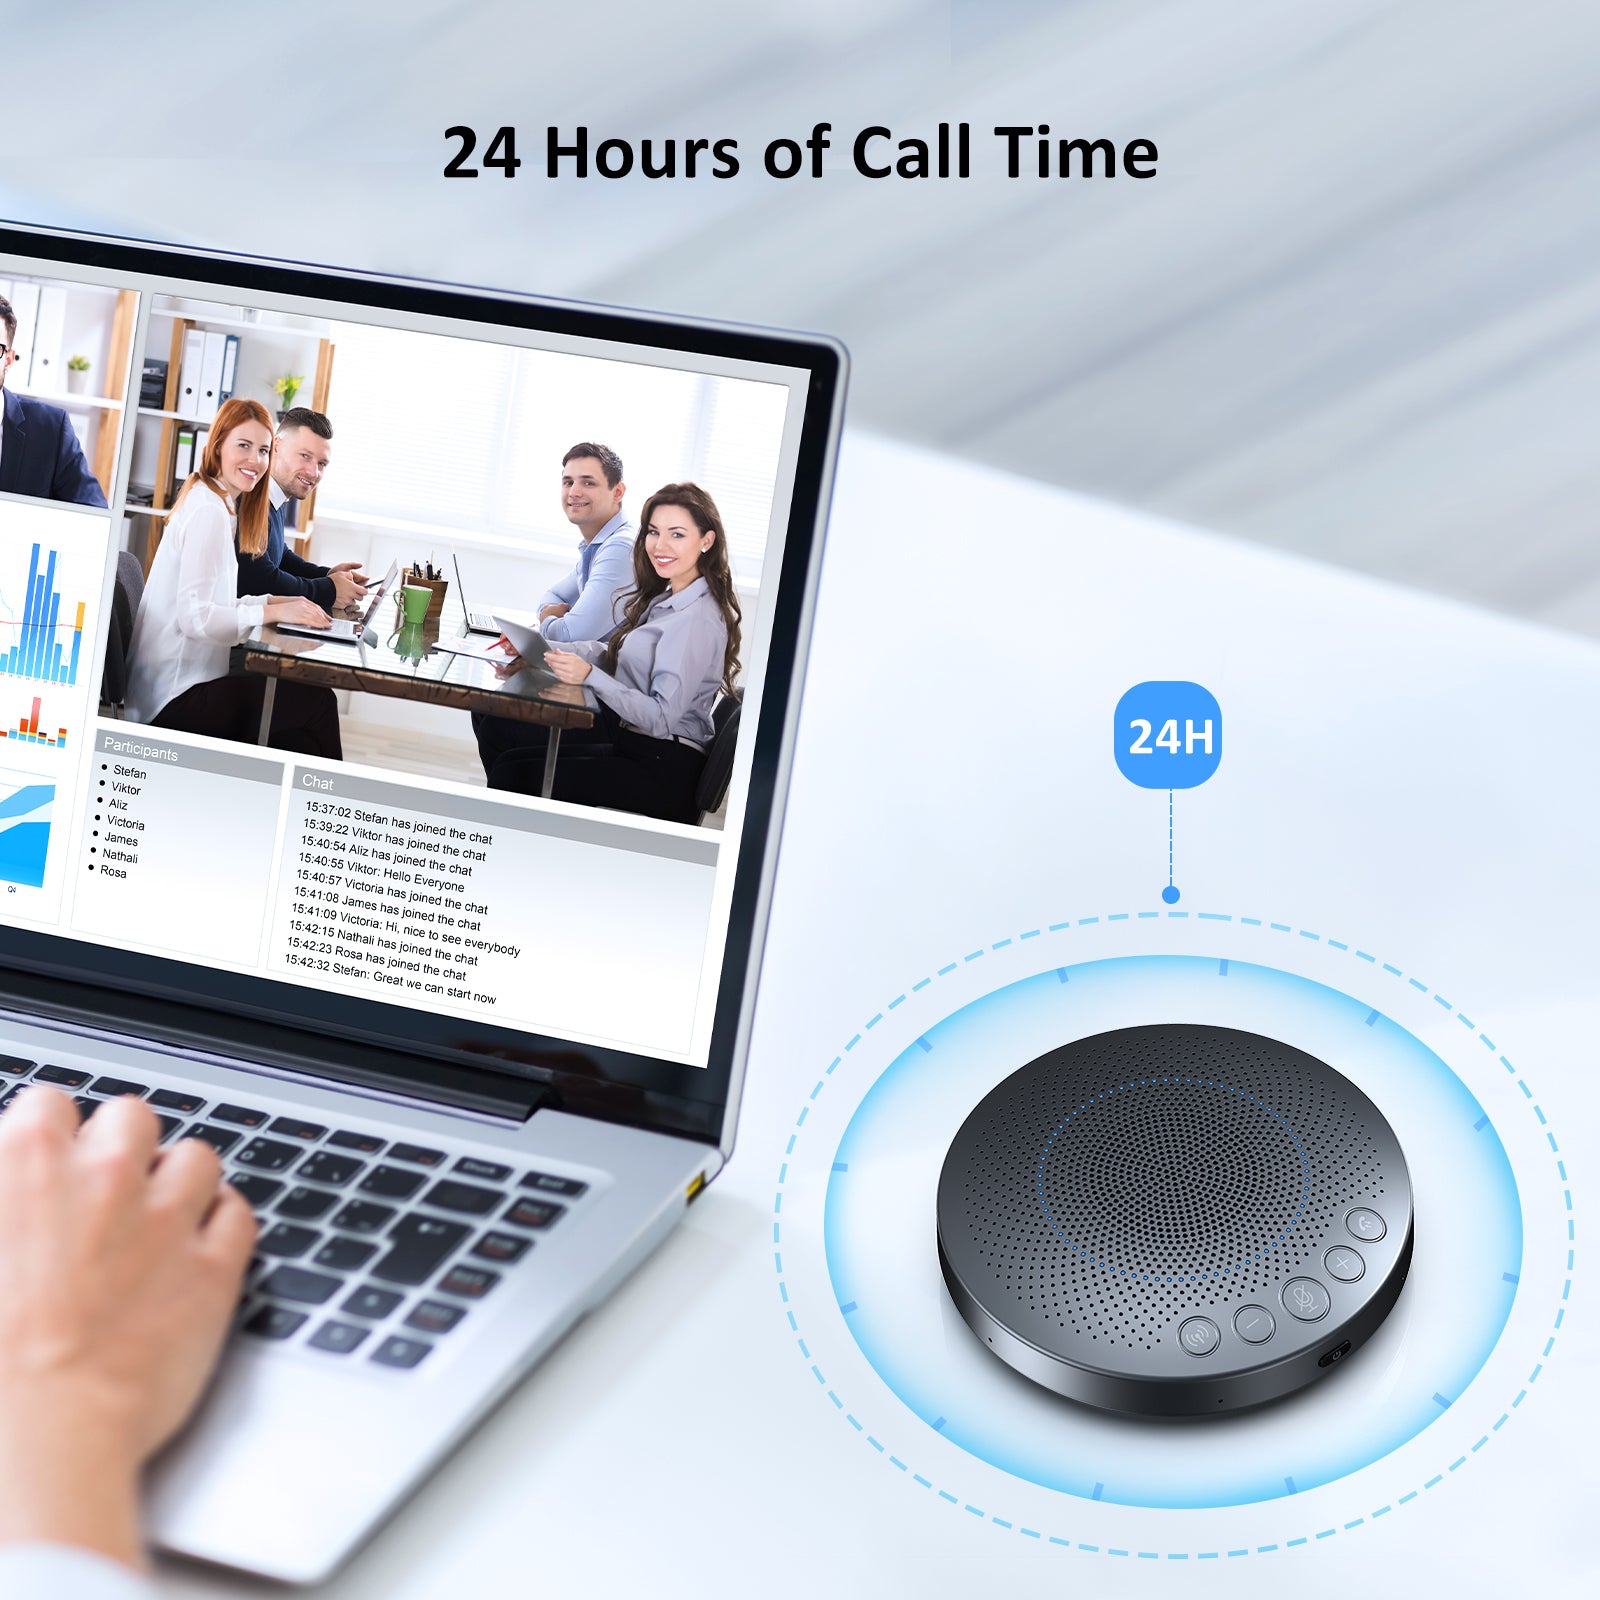 SPK03 Bluetooth Speakerphone offers up to 24 hours of call time.